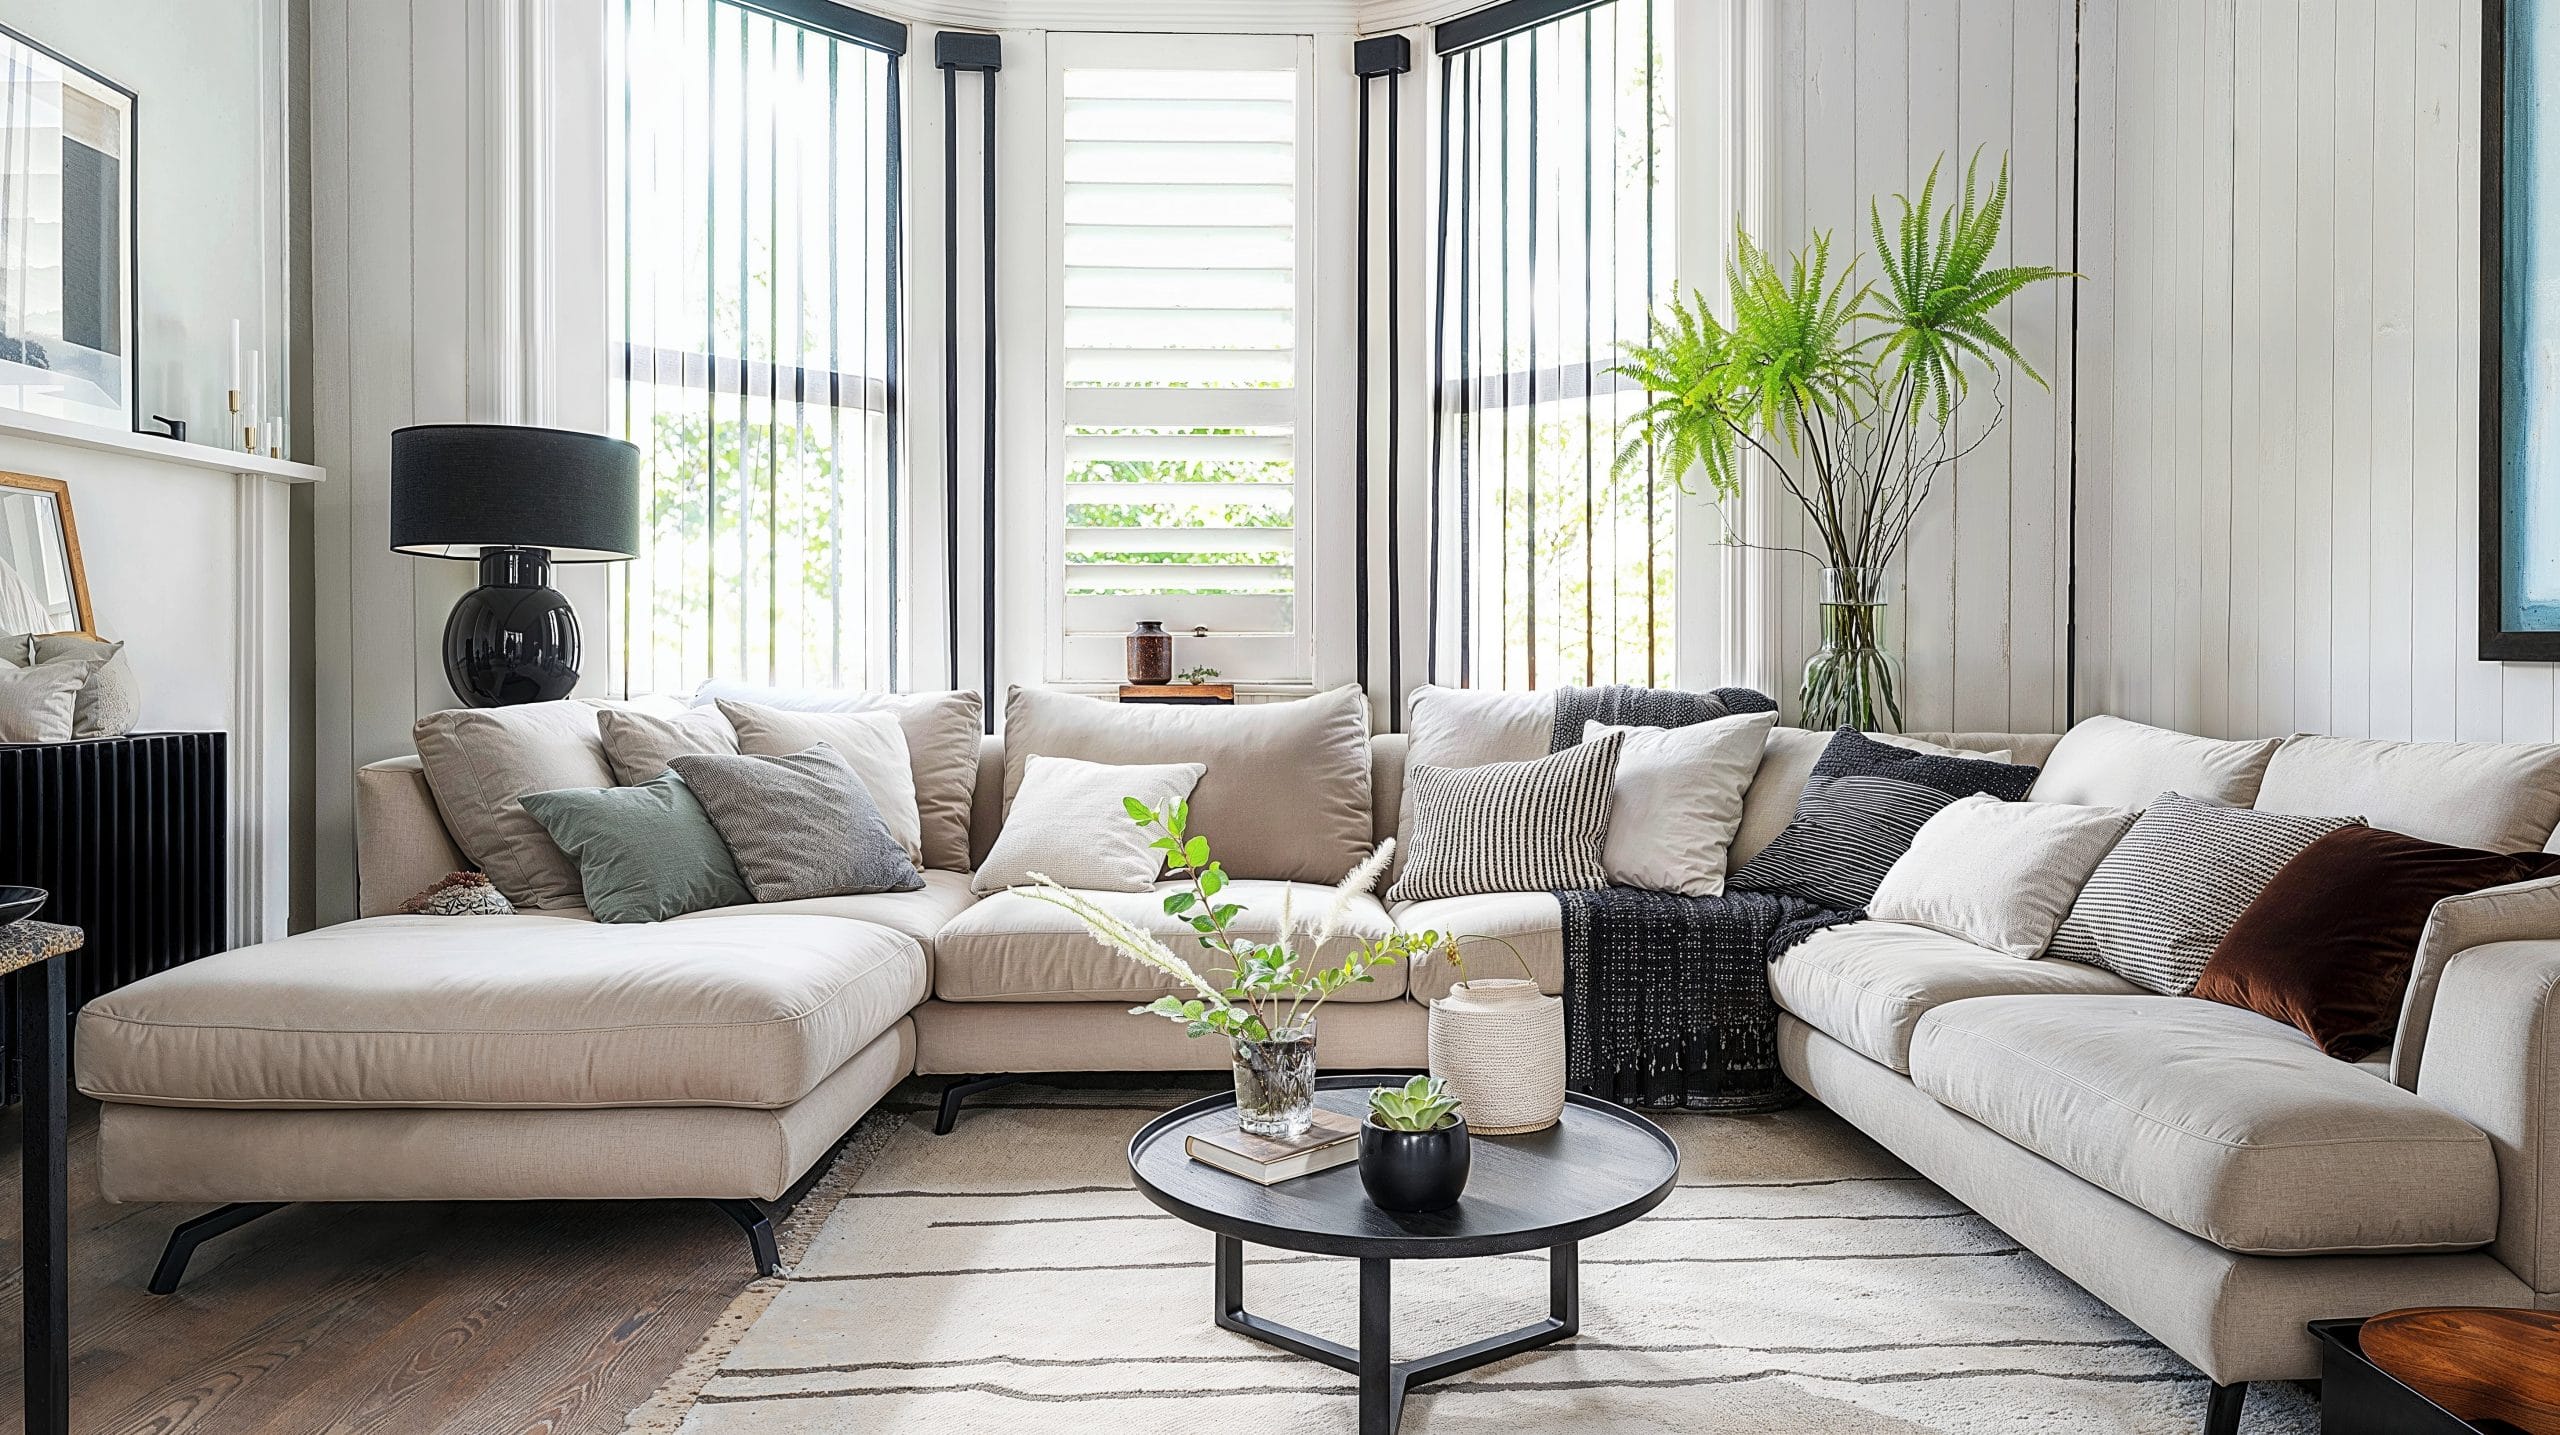 Living Room Designs for Small Spaces: Maximizing Square-Footage in Style